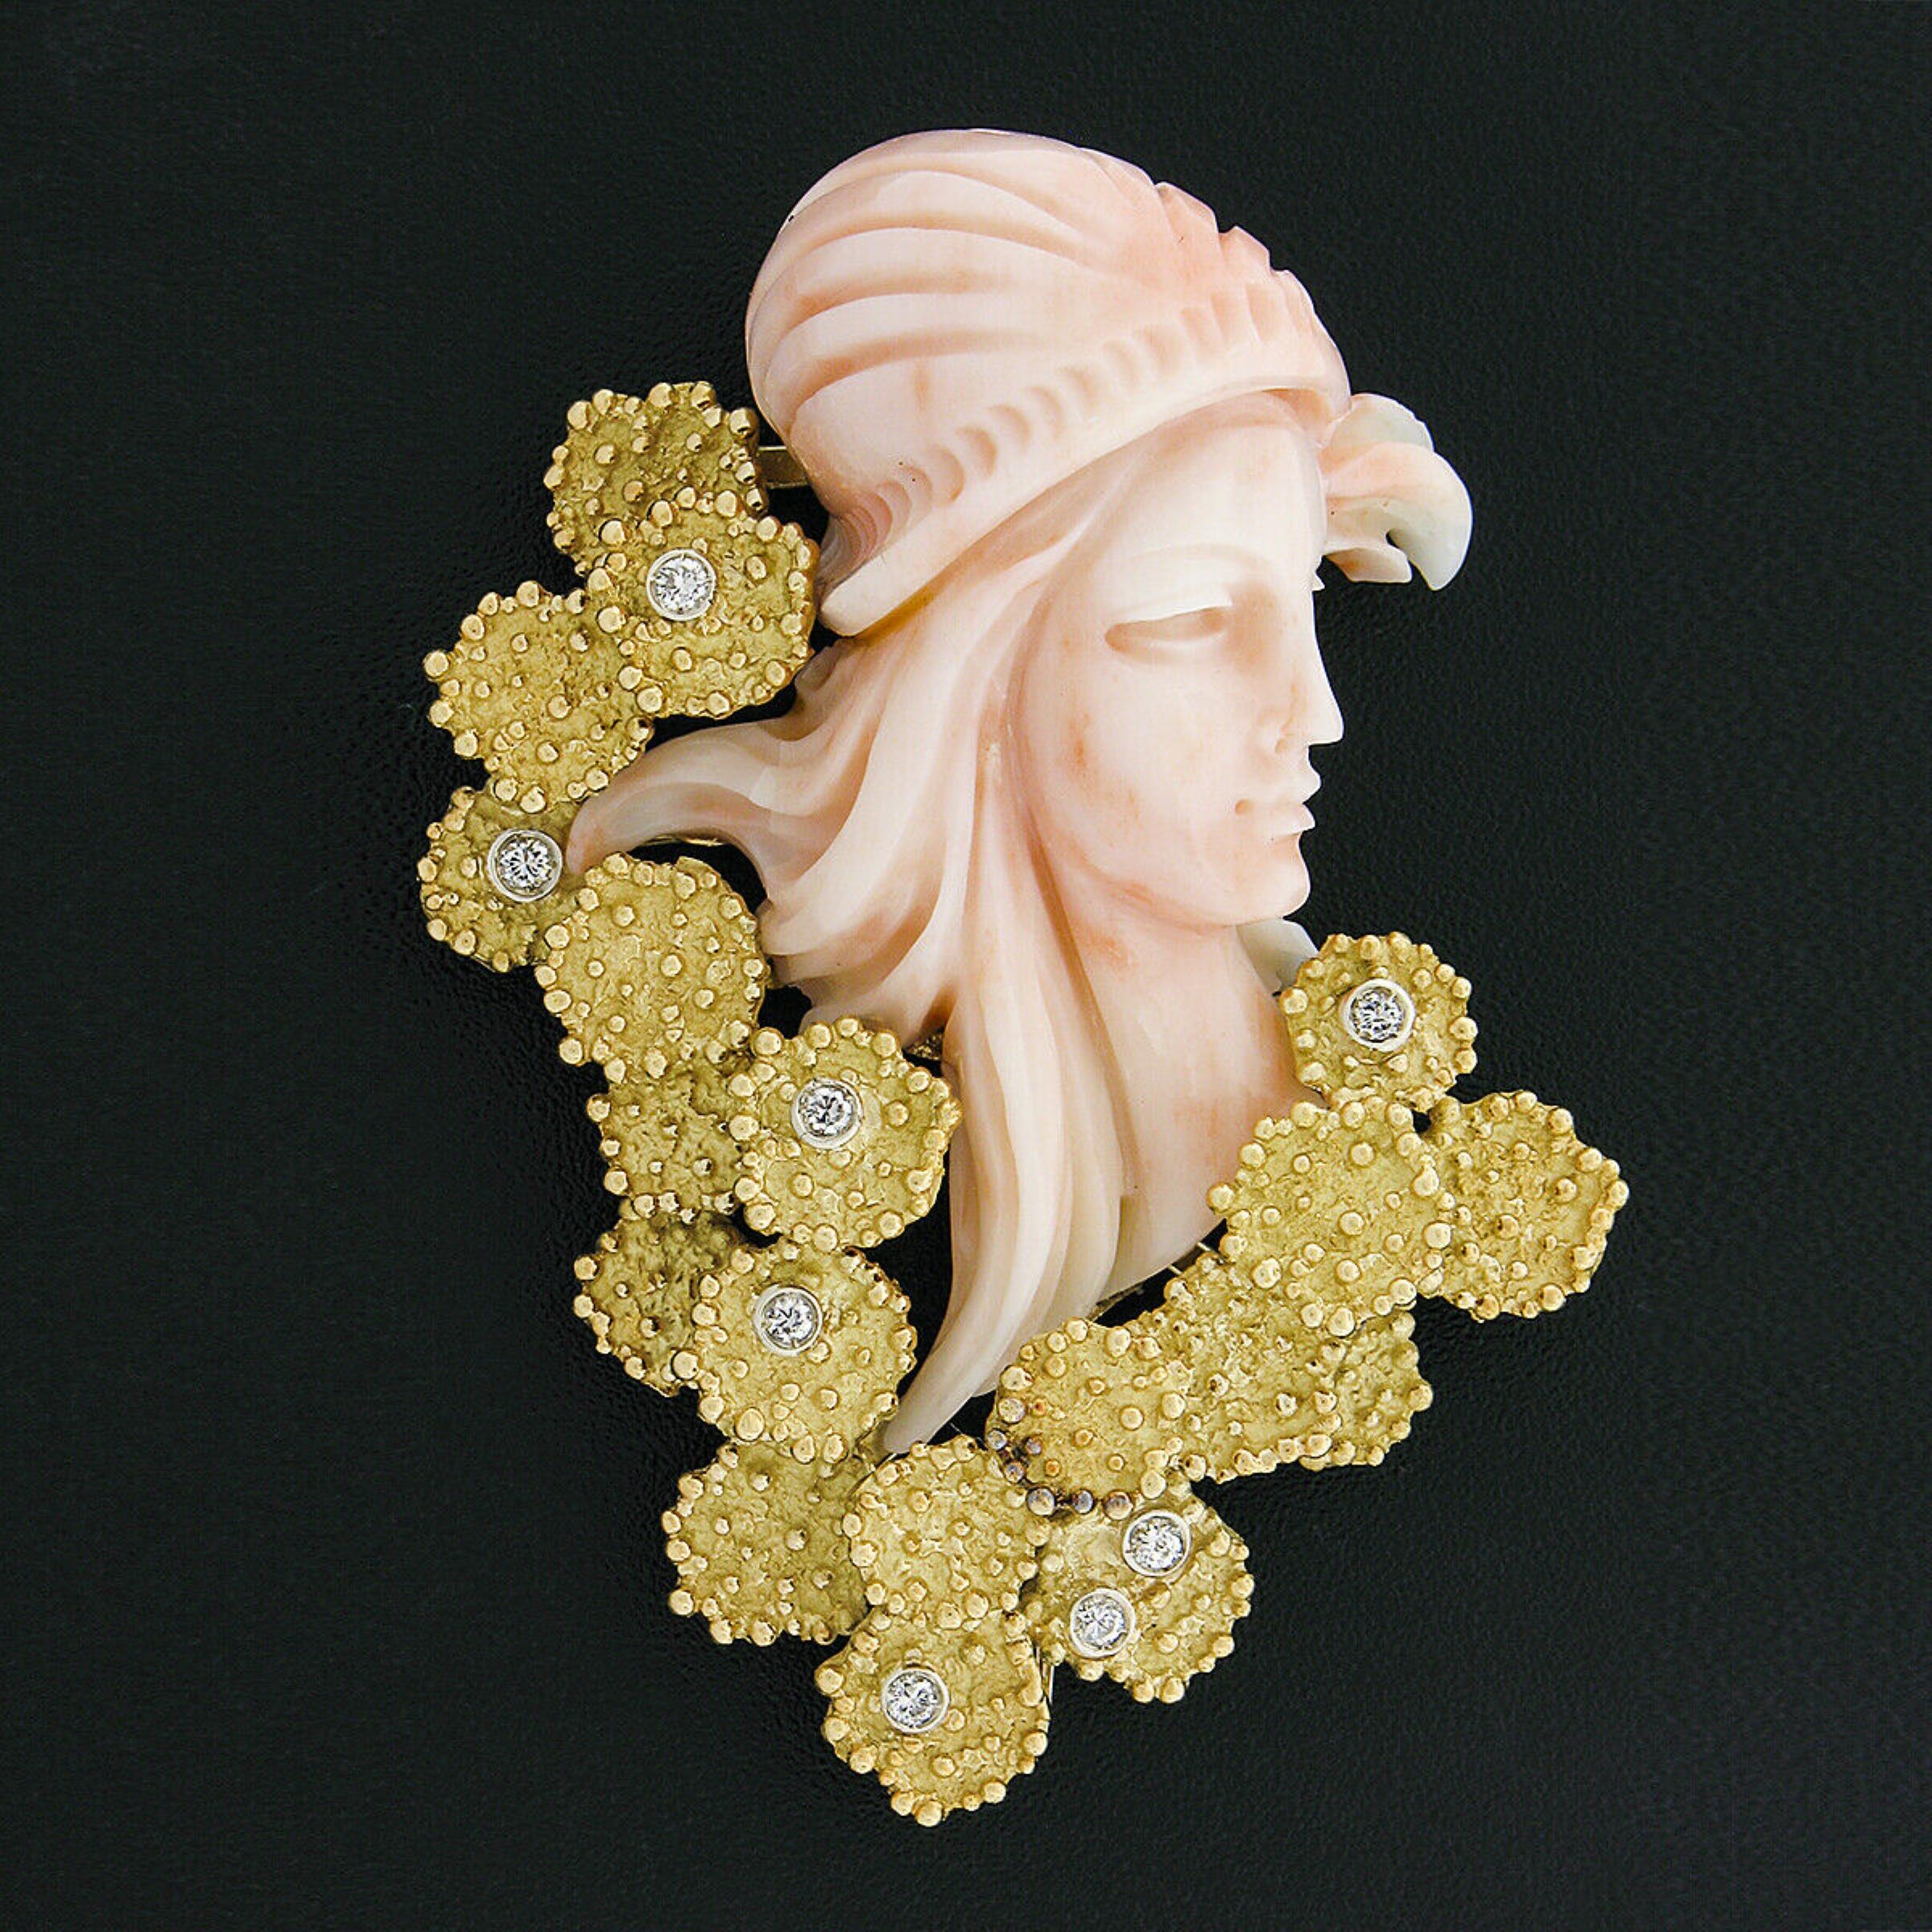 This outstanding vintage brooch/pin is crafted in solid 18k yellow gold and features a beautiful angel skin coral that is masterfully carved into showing an absolutely lovely and light angel skin color throughout and displays a detailed woman's face